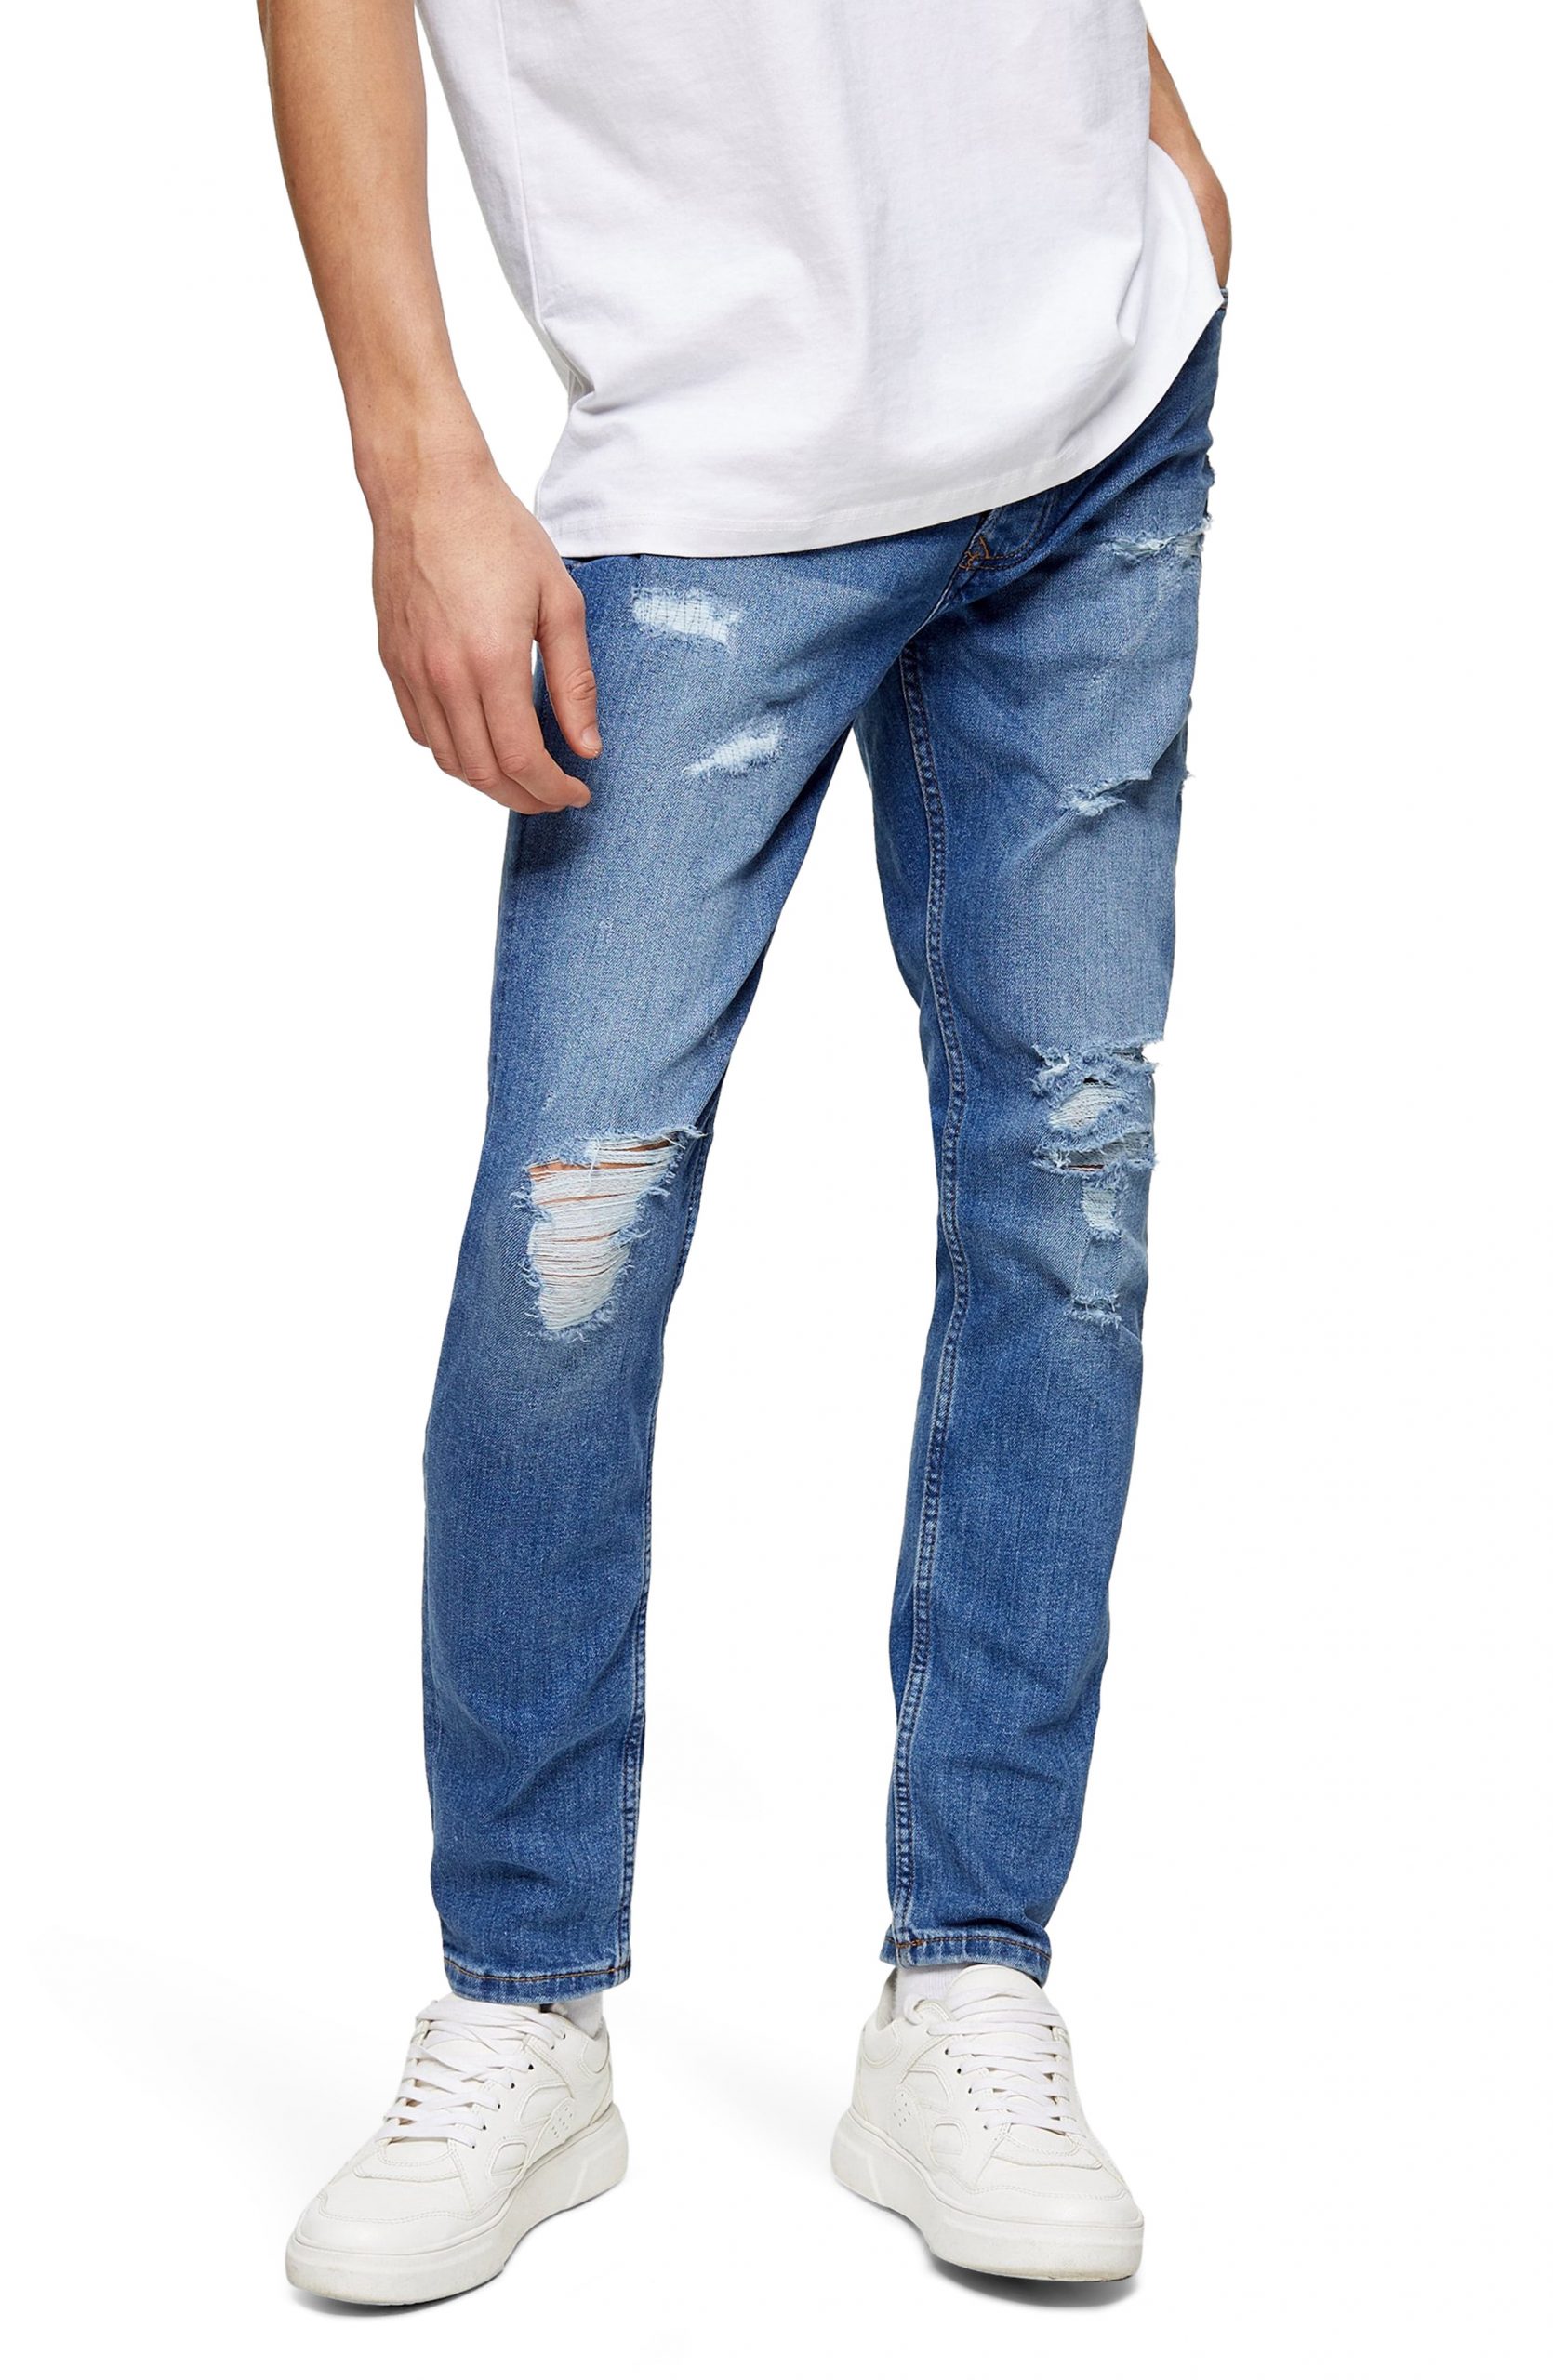 Men’s Topman Ripped Skinny Jeans, Size 30 x 32 - Blue | The Fashionisto